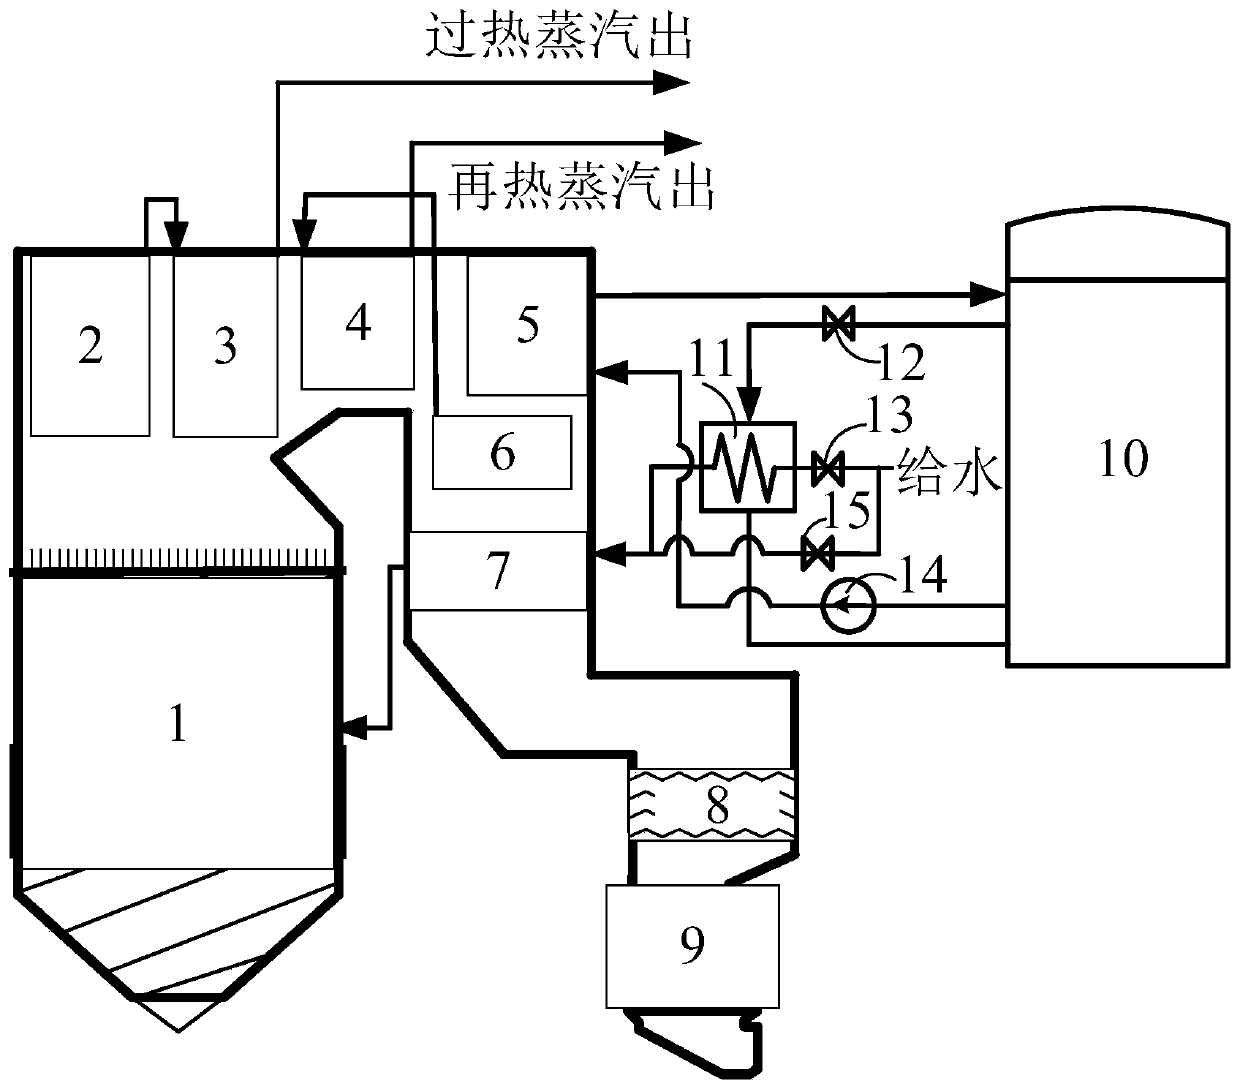 Full-working-condition auxiliary denitration system and running method